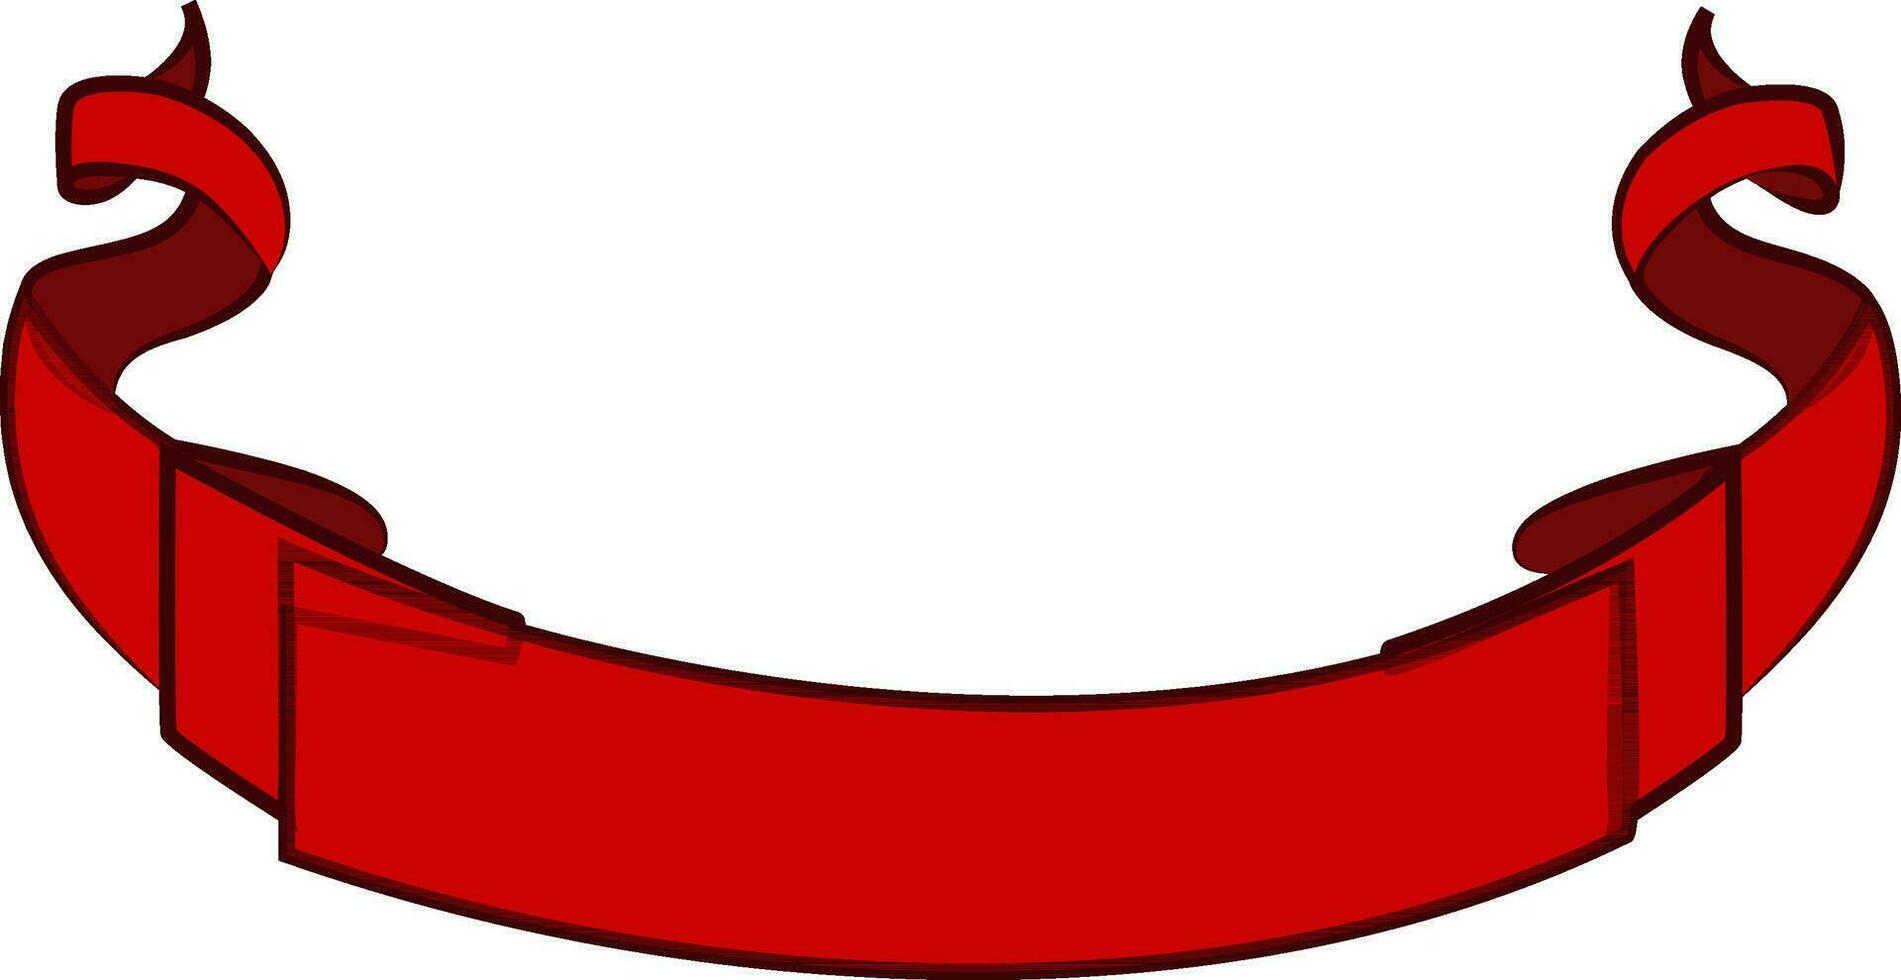 Flat style symbol of a red ribbon. vector